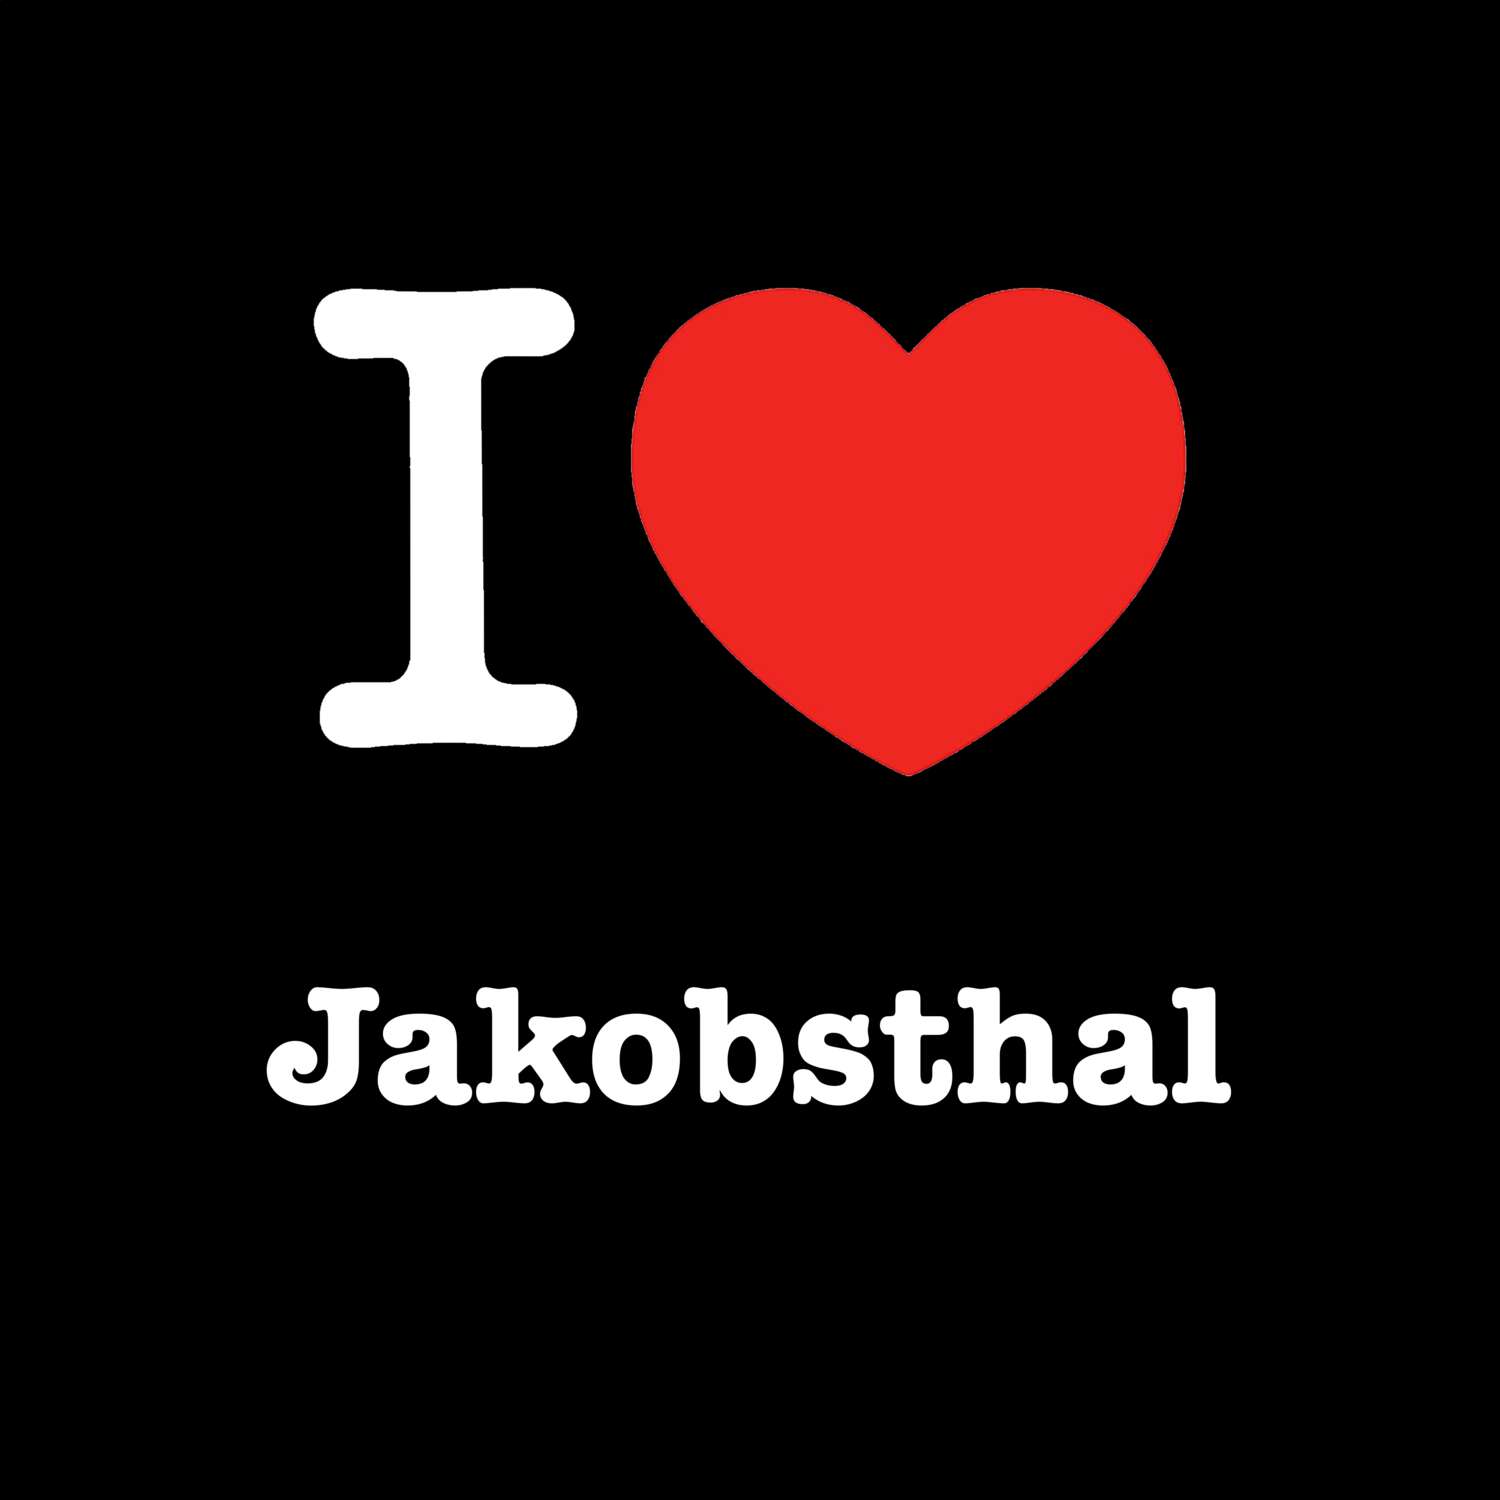 Jakobsthal T-Shirt »I love«